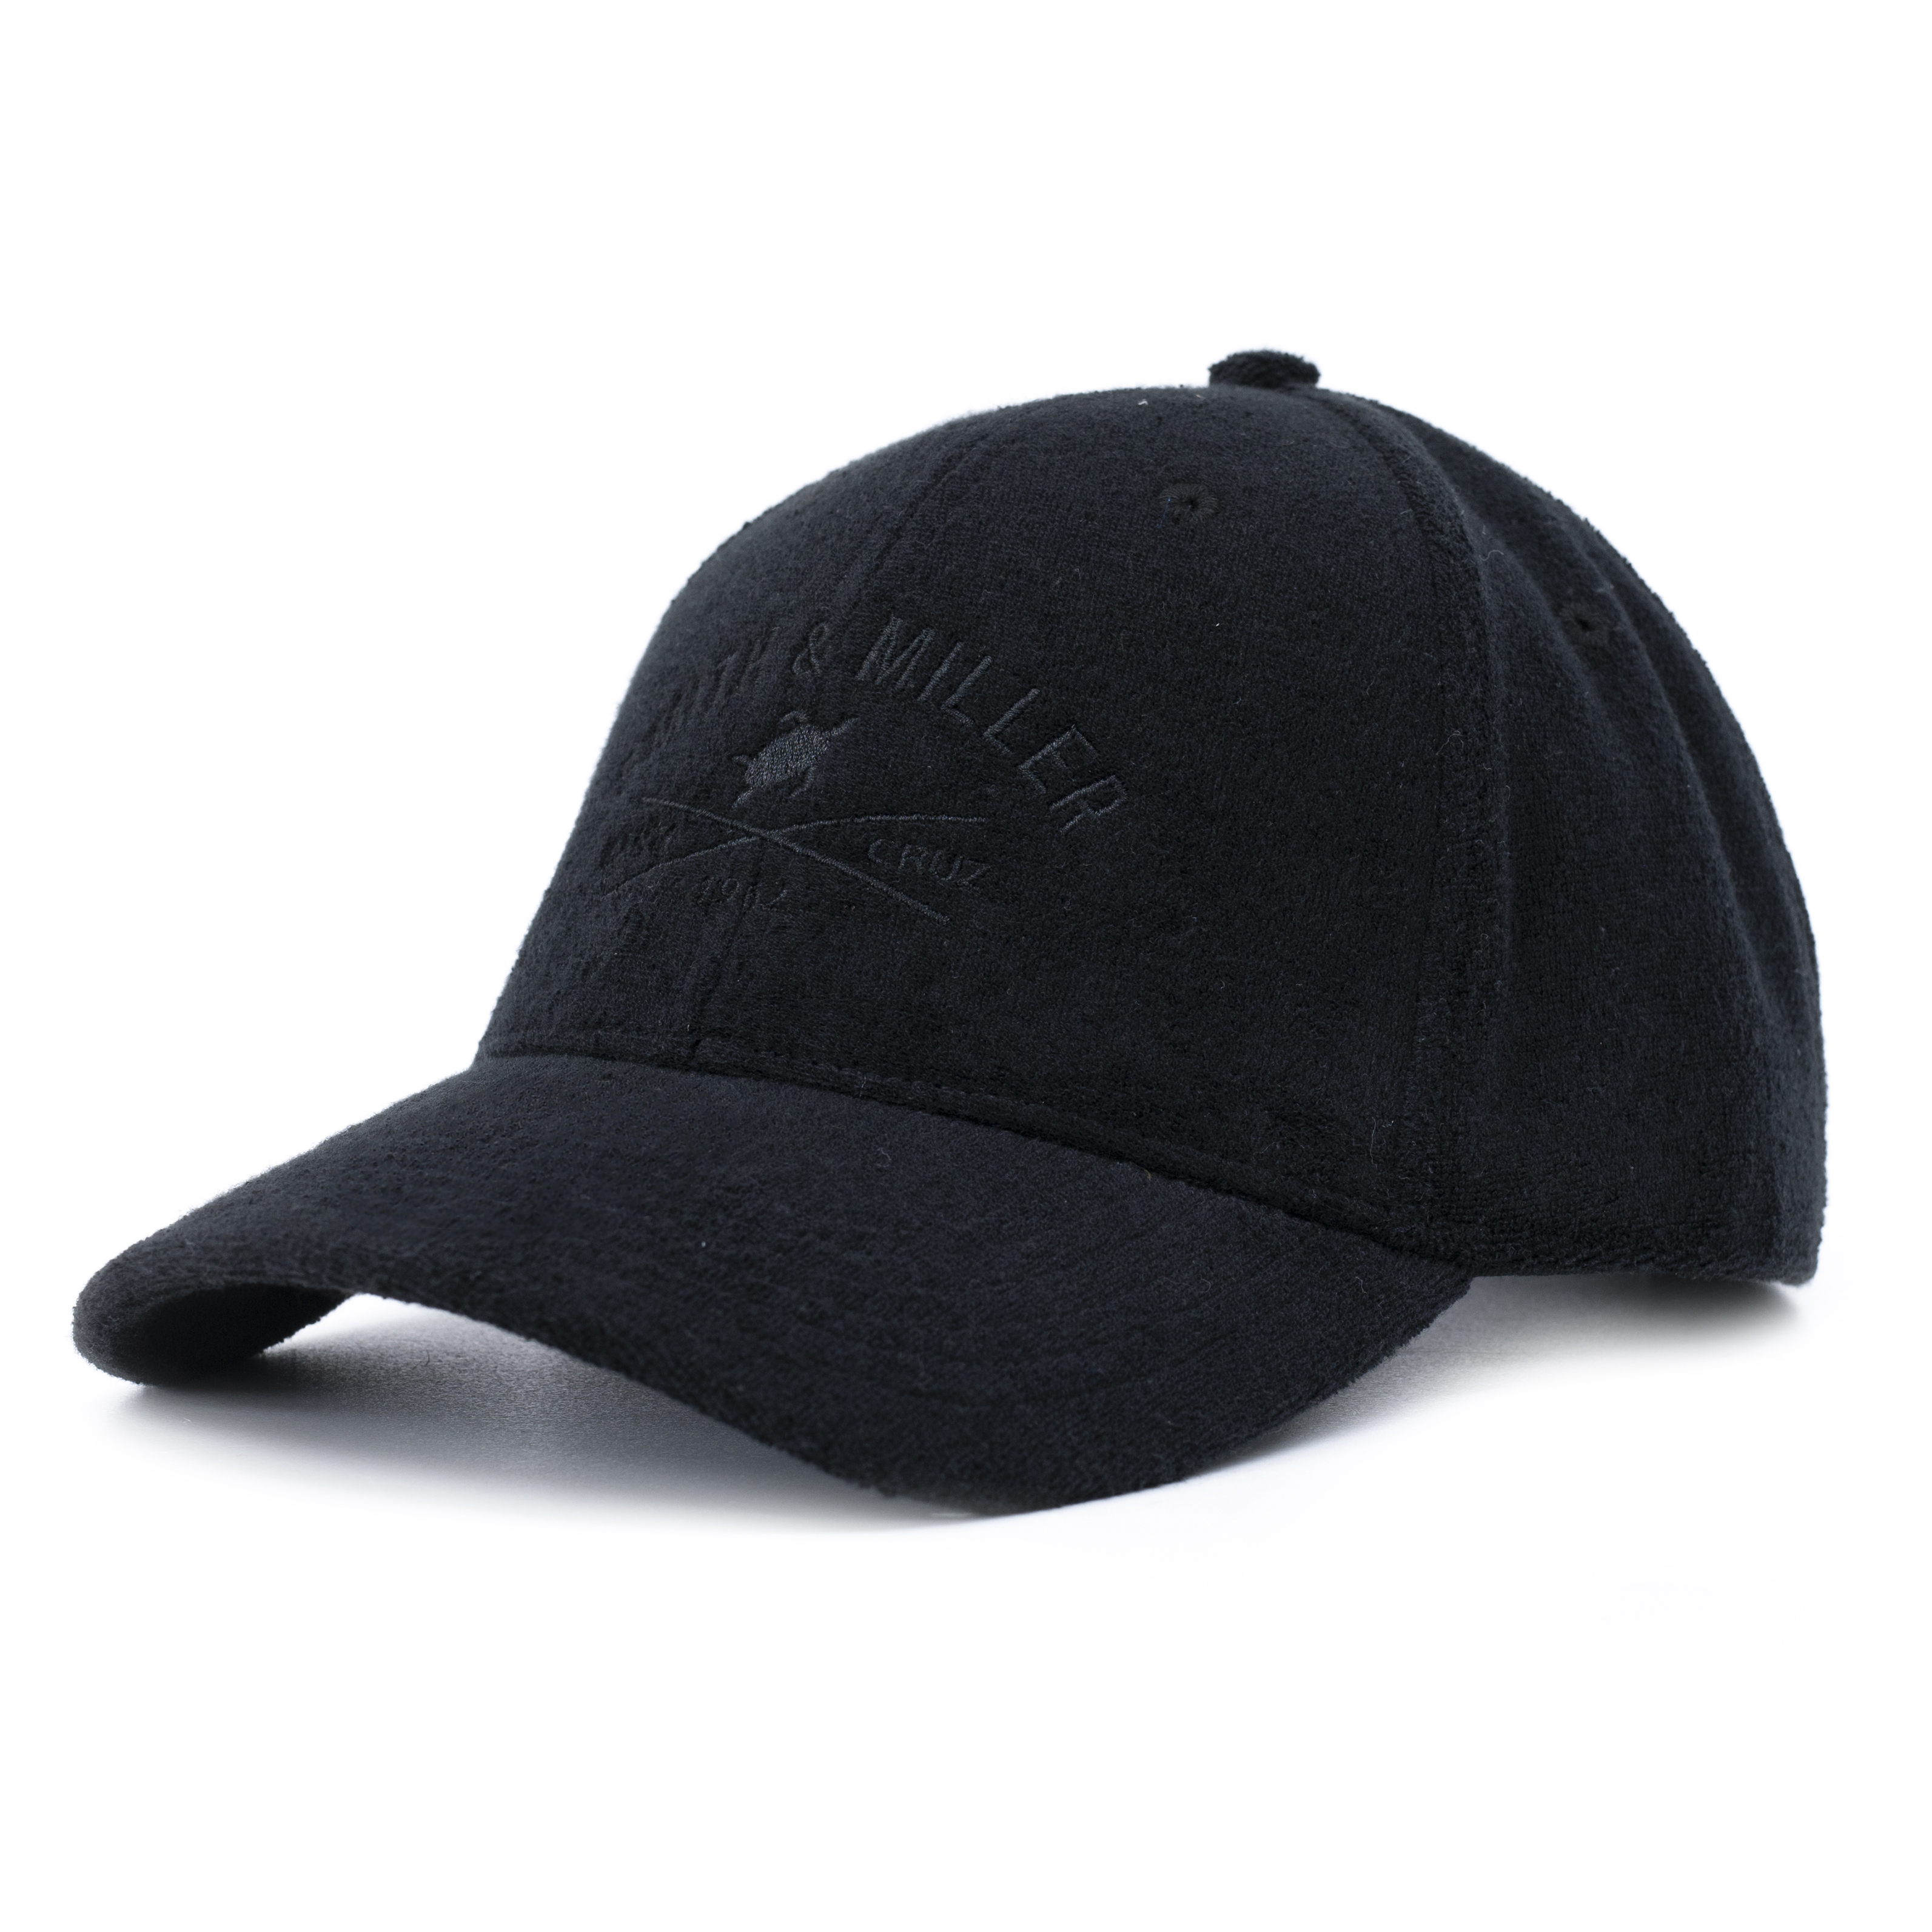 Smith & Miller Likely Unisex Curved Cap, black